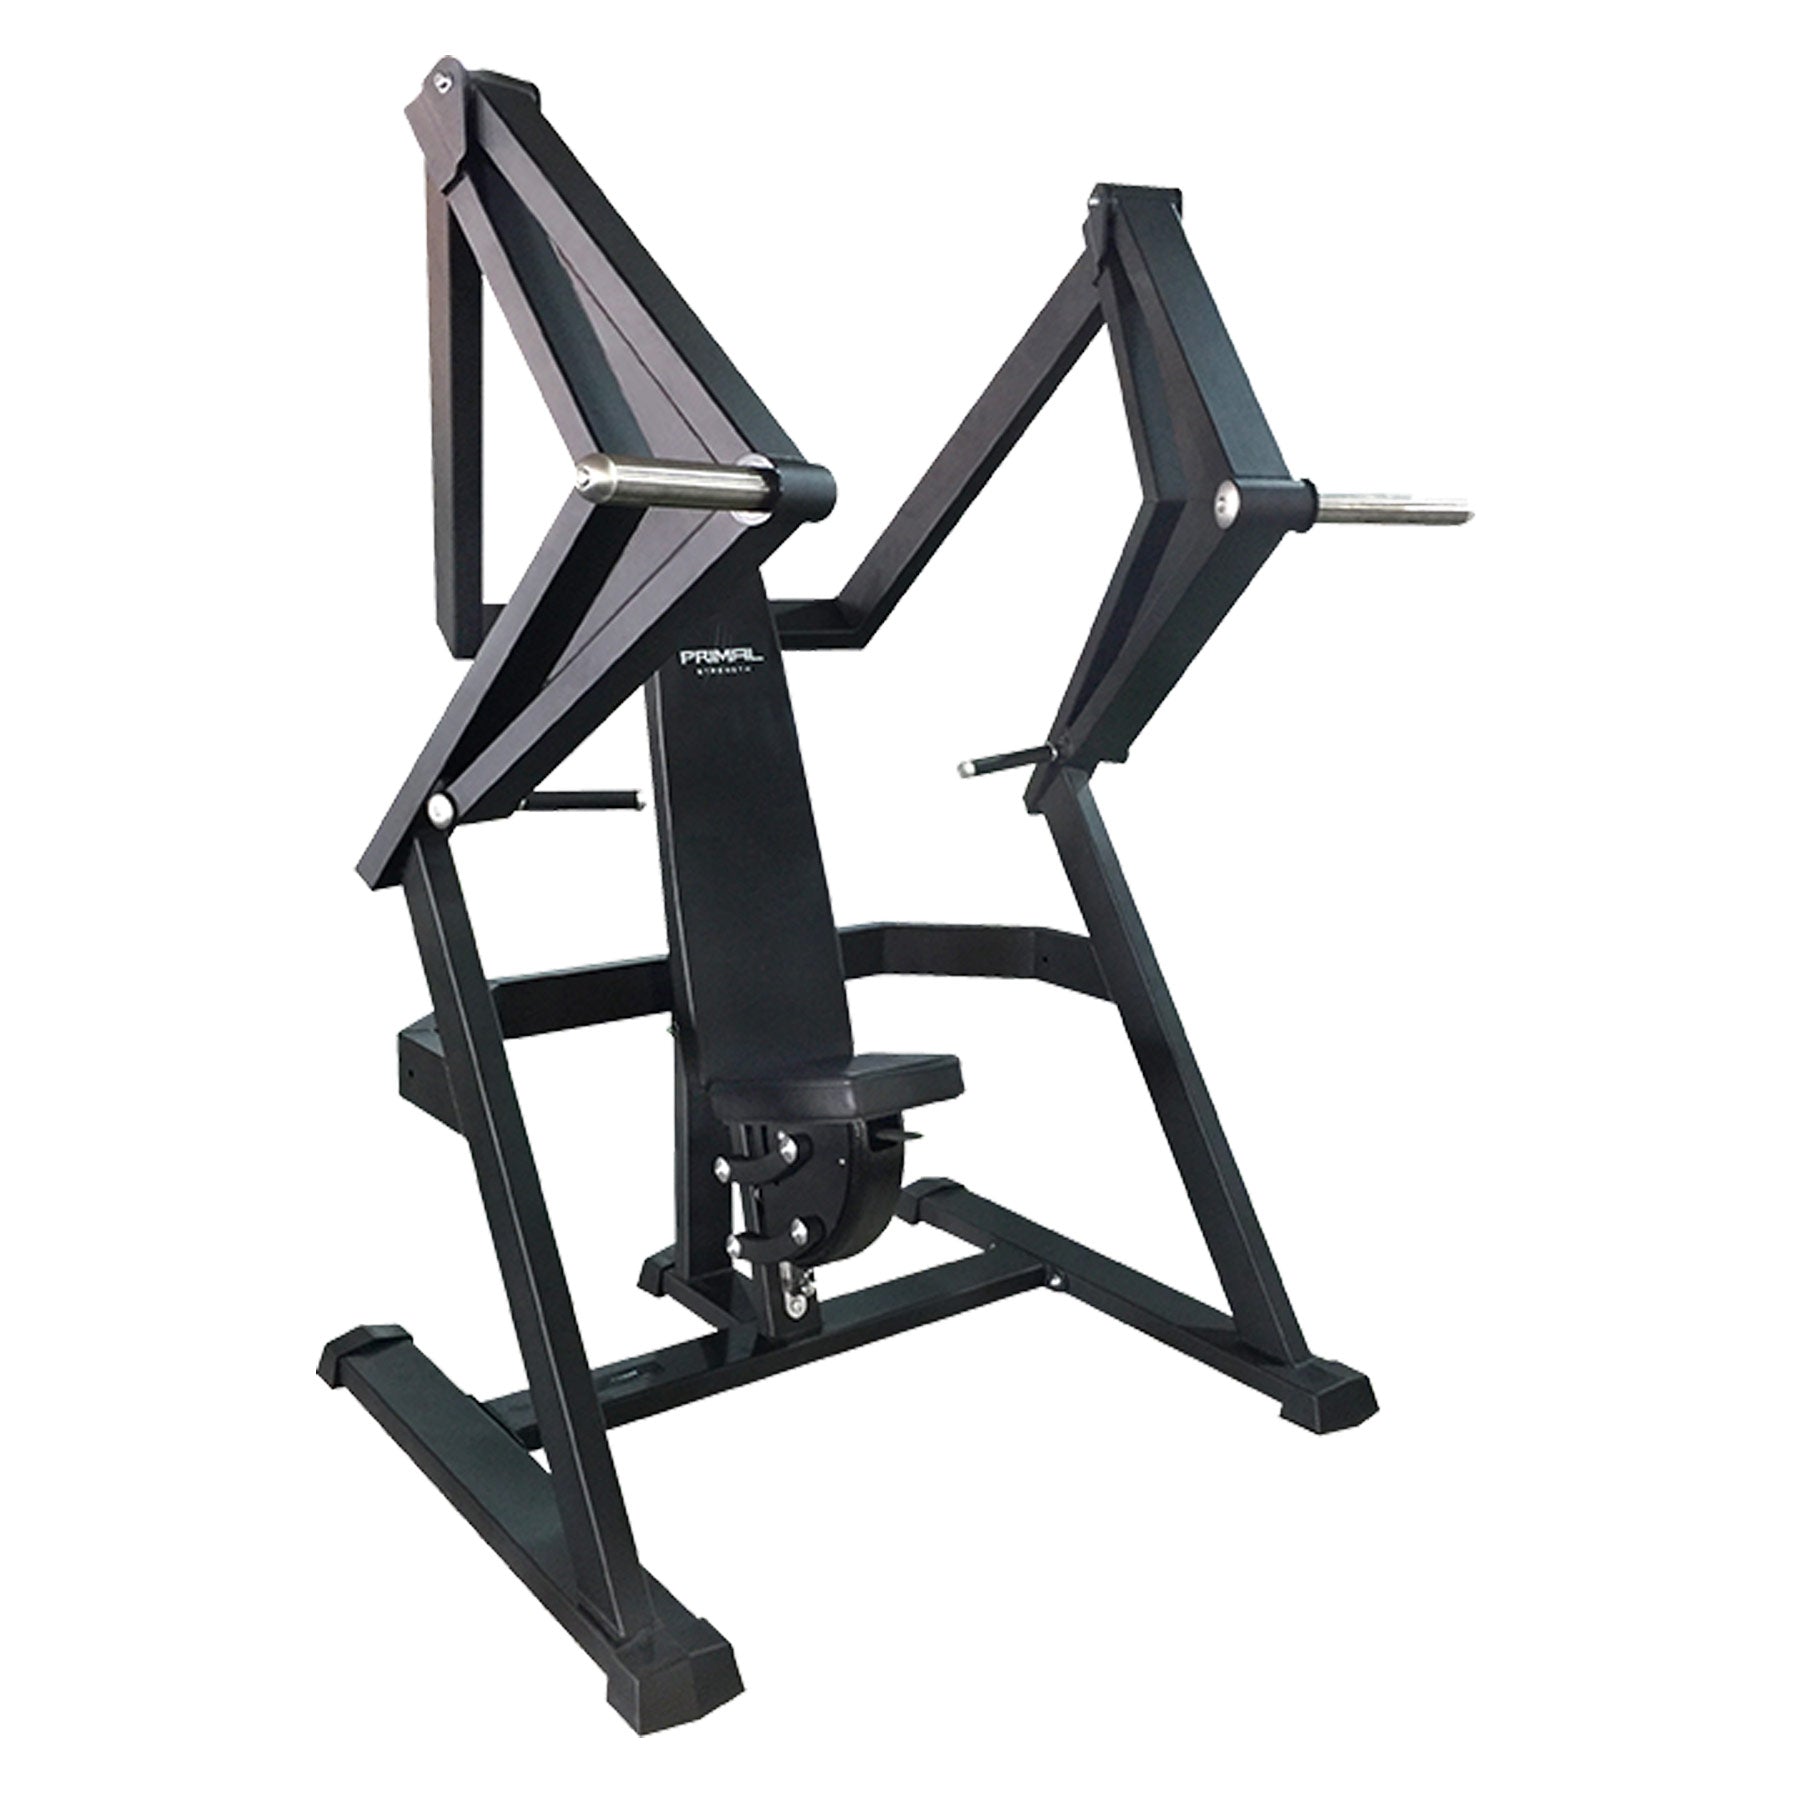 Chest Press Fitness Equipment in Sector 32 D , Barwala , Prime Bodies